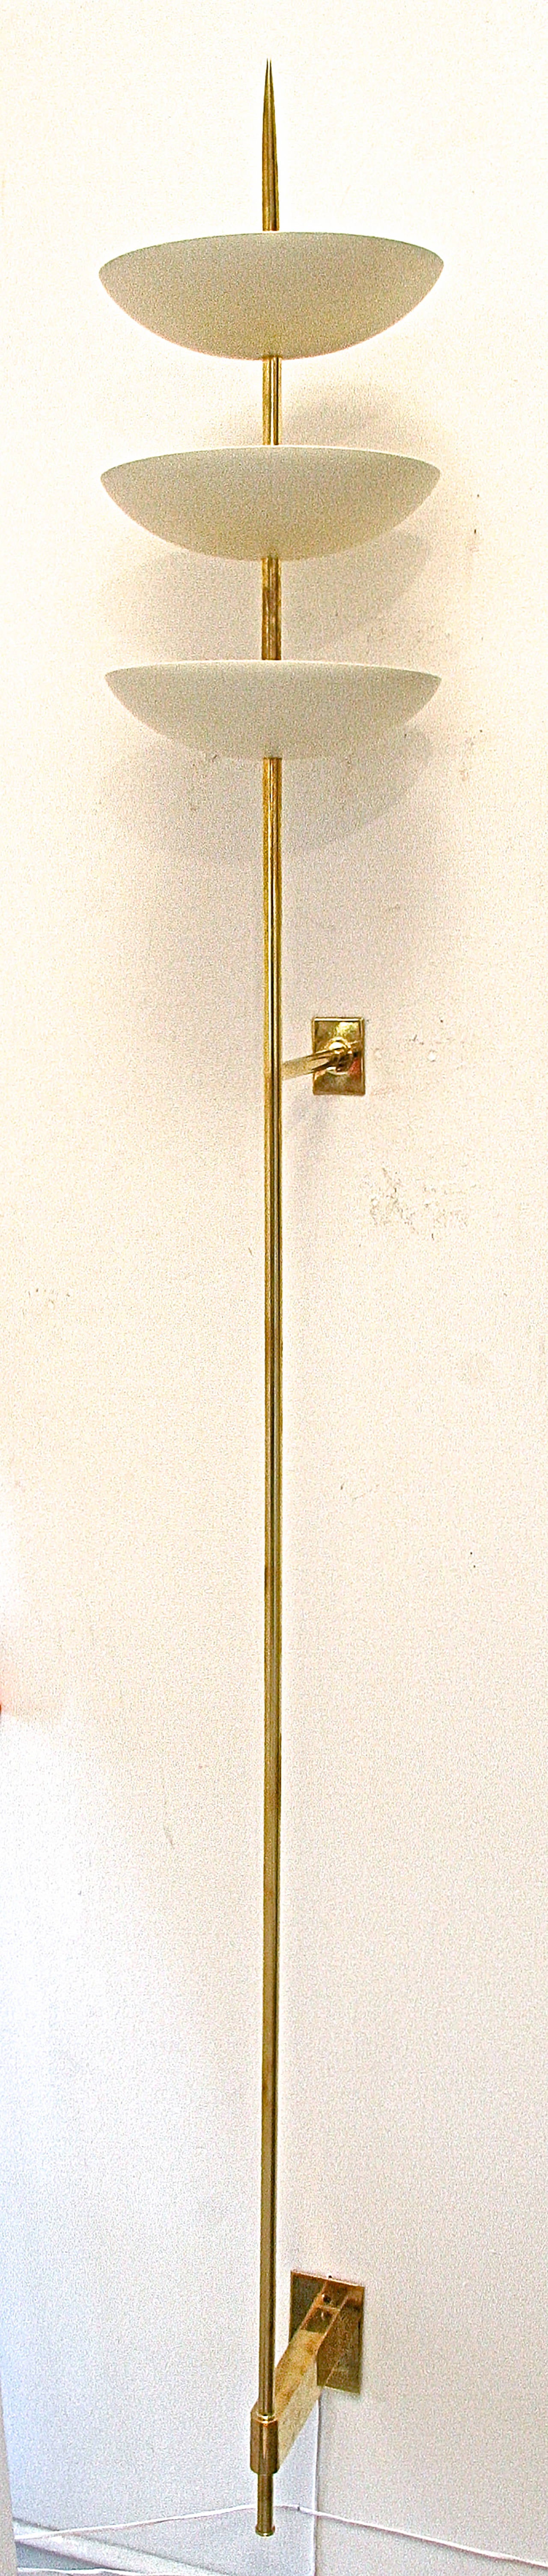 Unique in scale these sconces have an amazing presence. They make an incredibly strong statement.